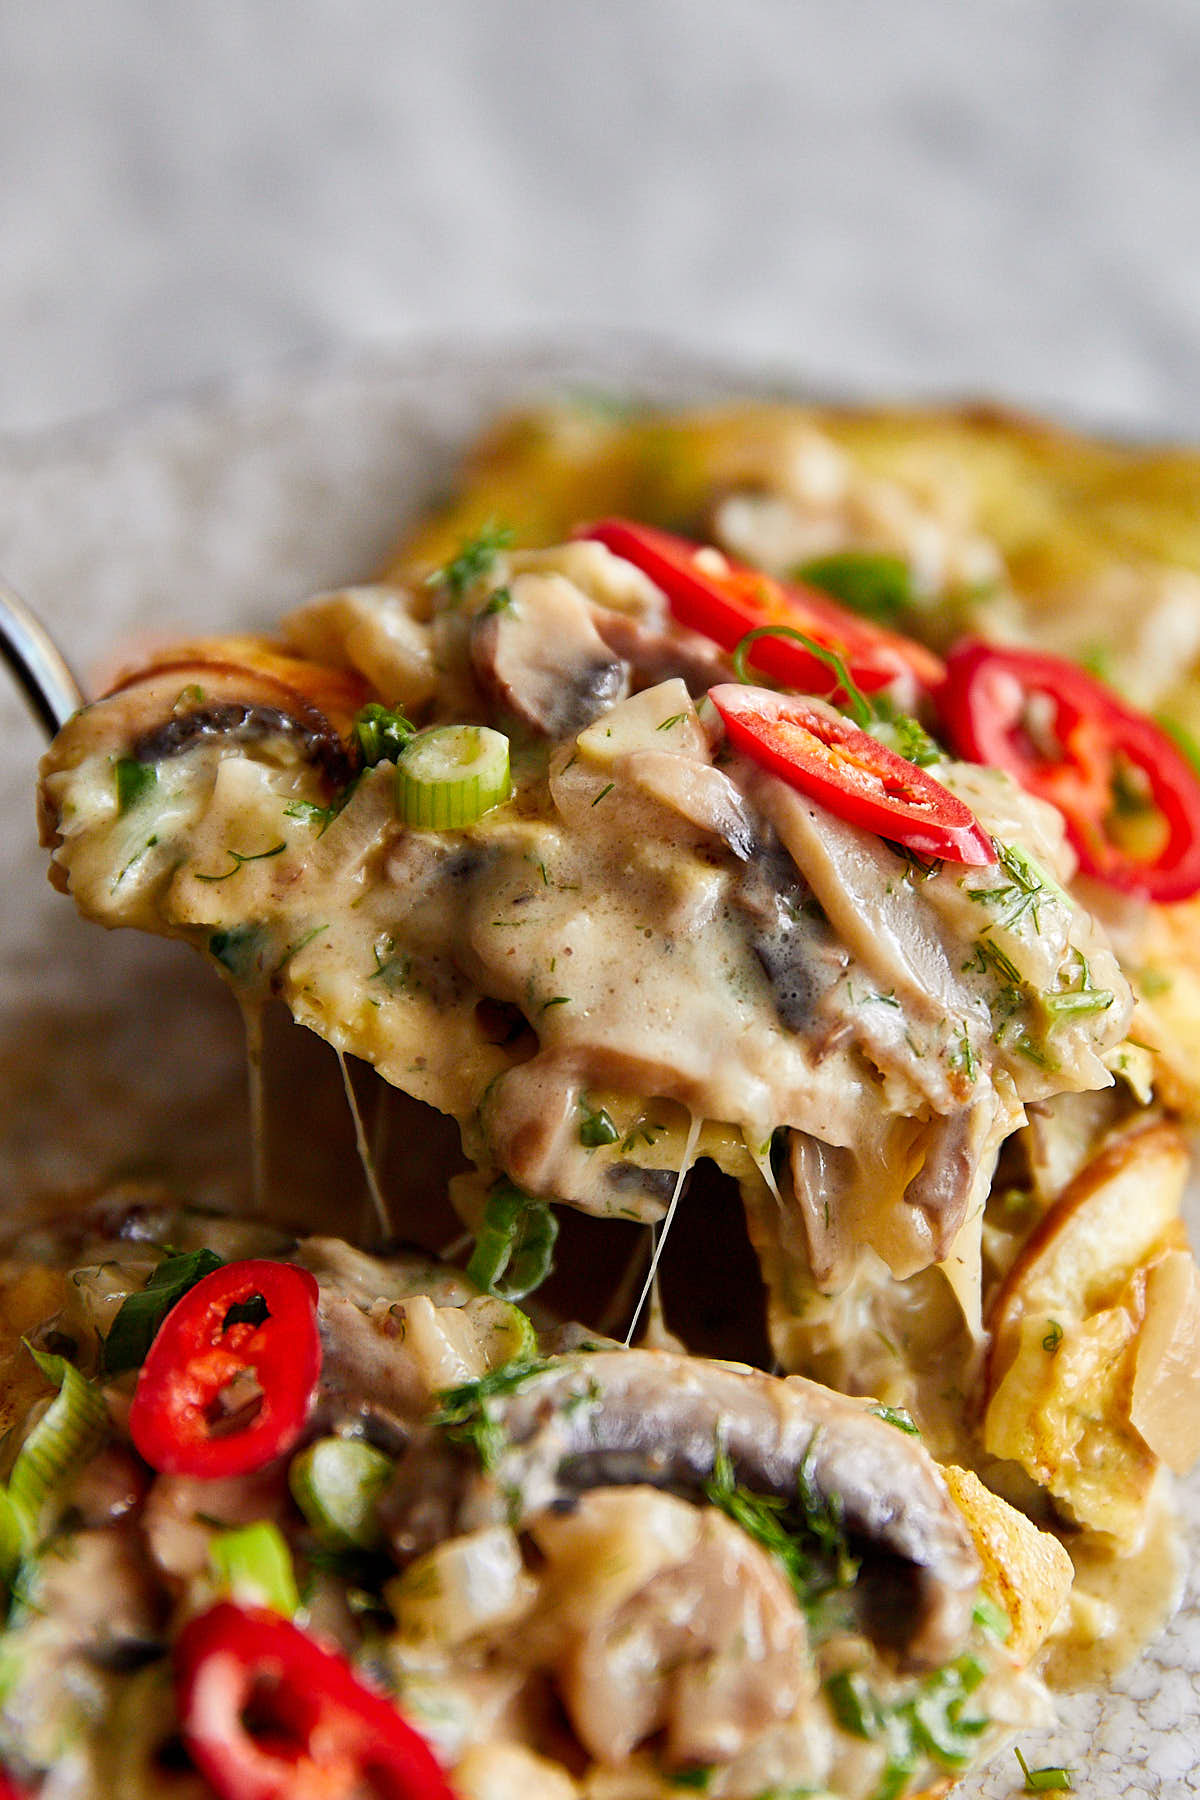 Delicious mushroom omelette with cheesy and creamy mushrooms.